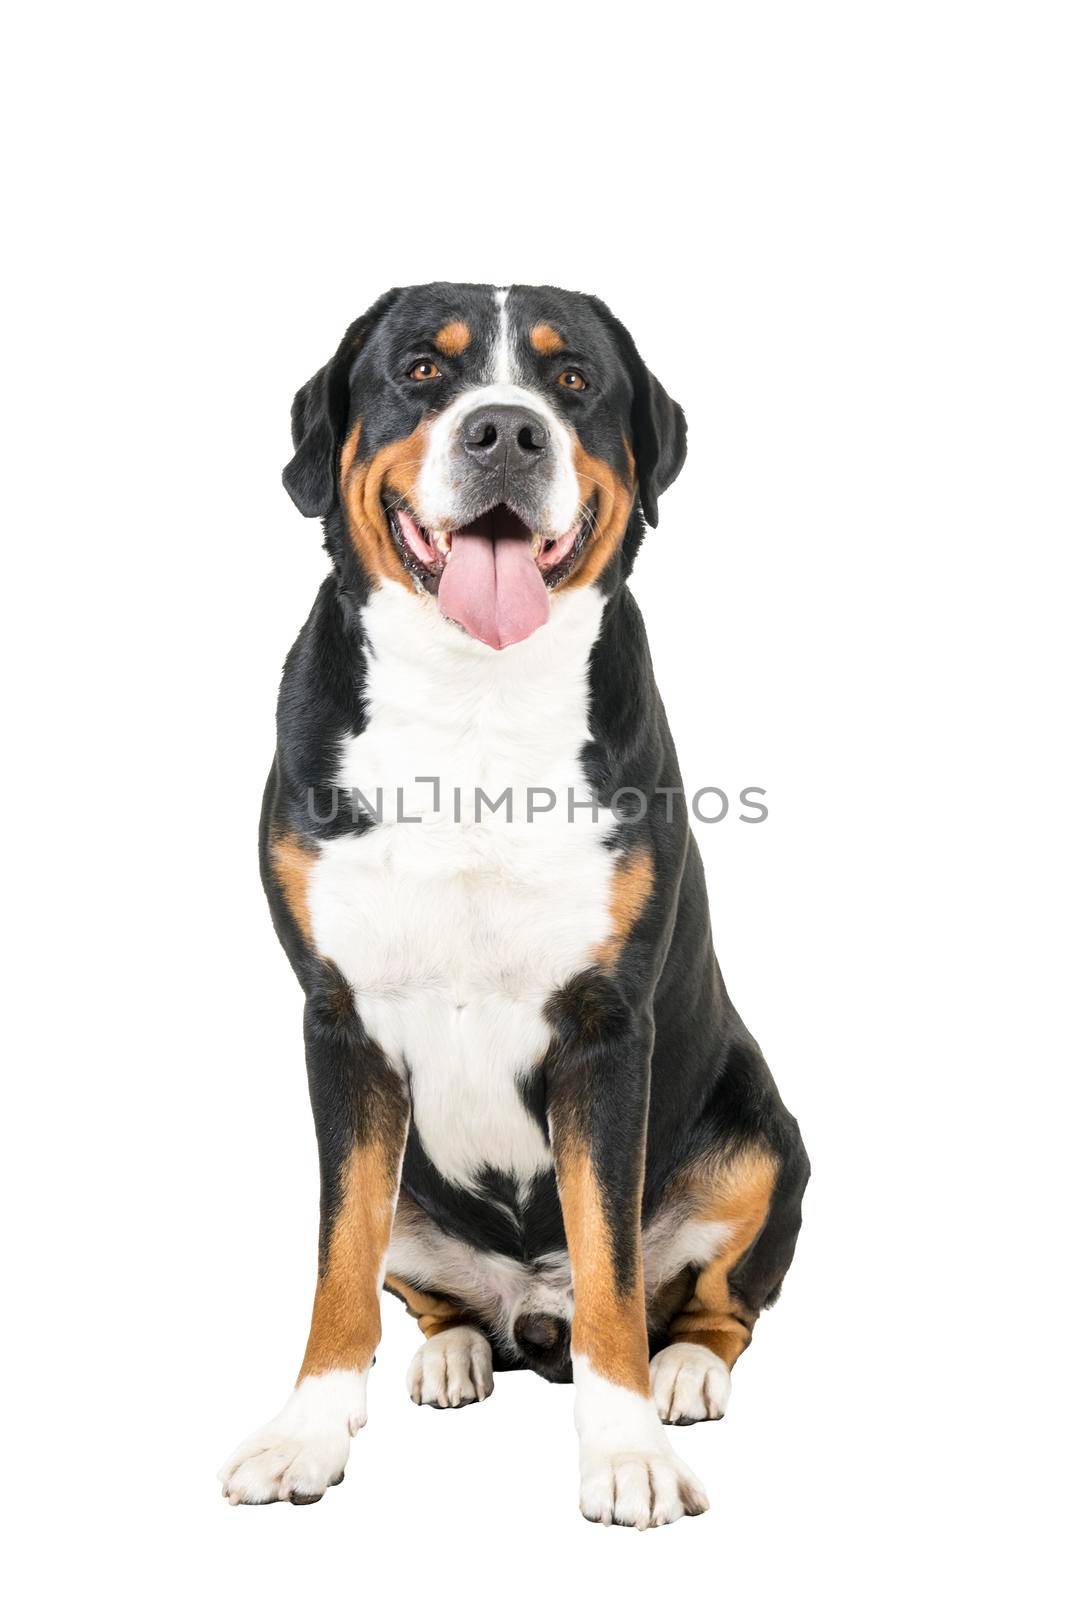 A Greater Swiss Mountain Dog sitting and looking into the camera